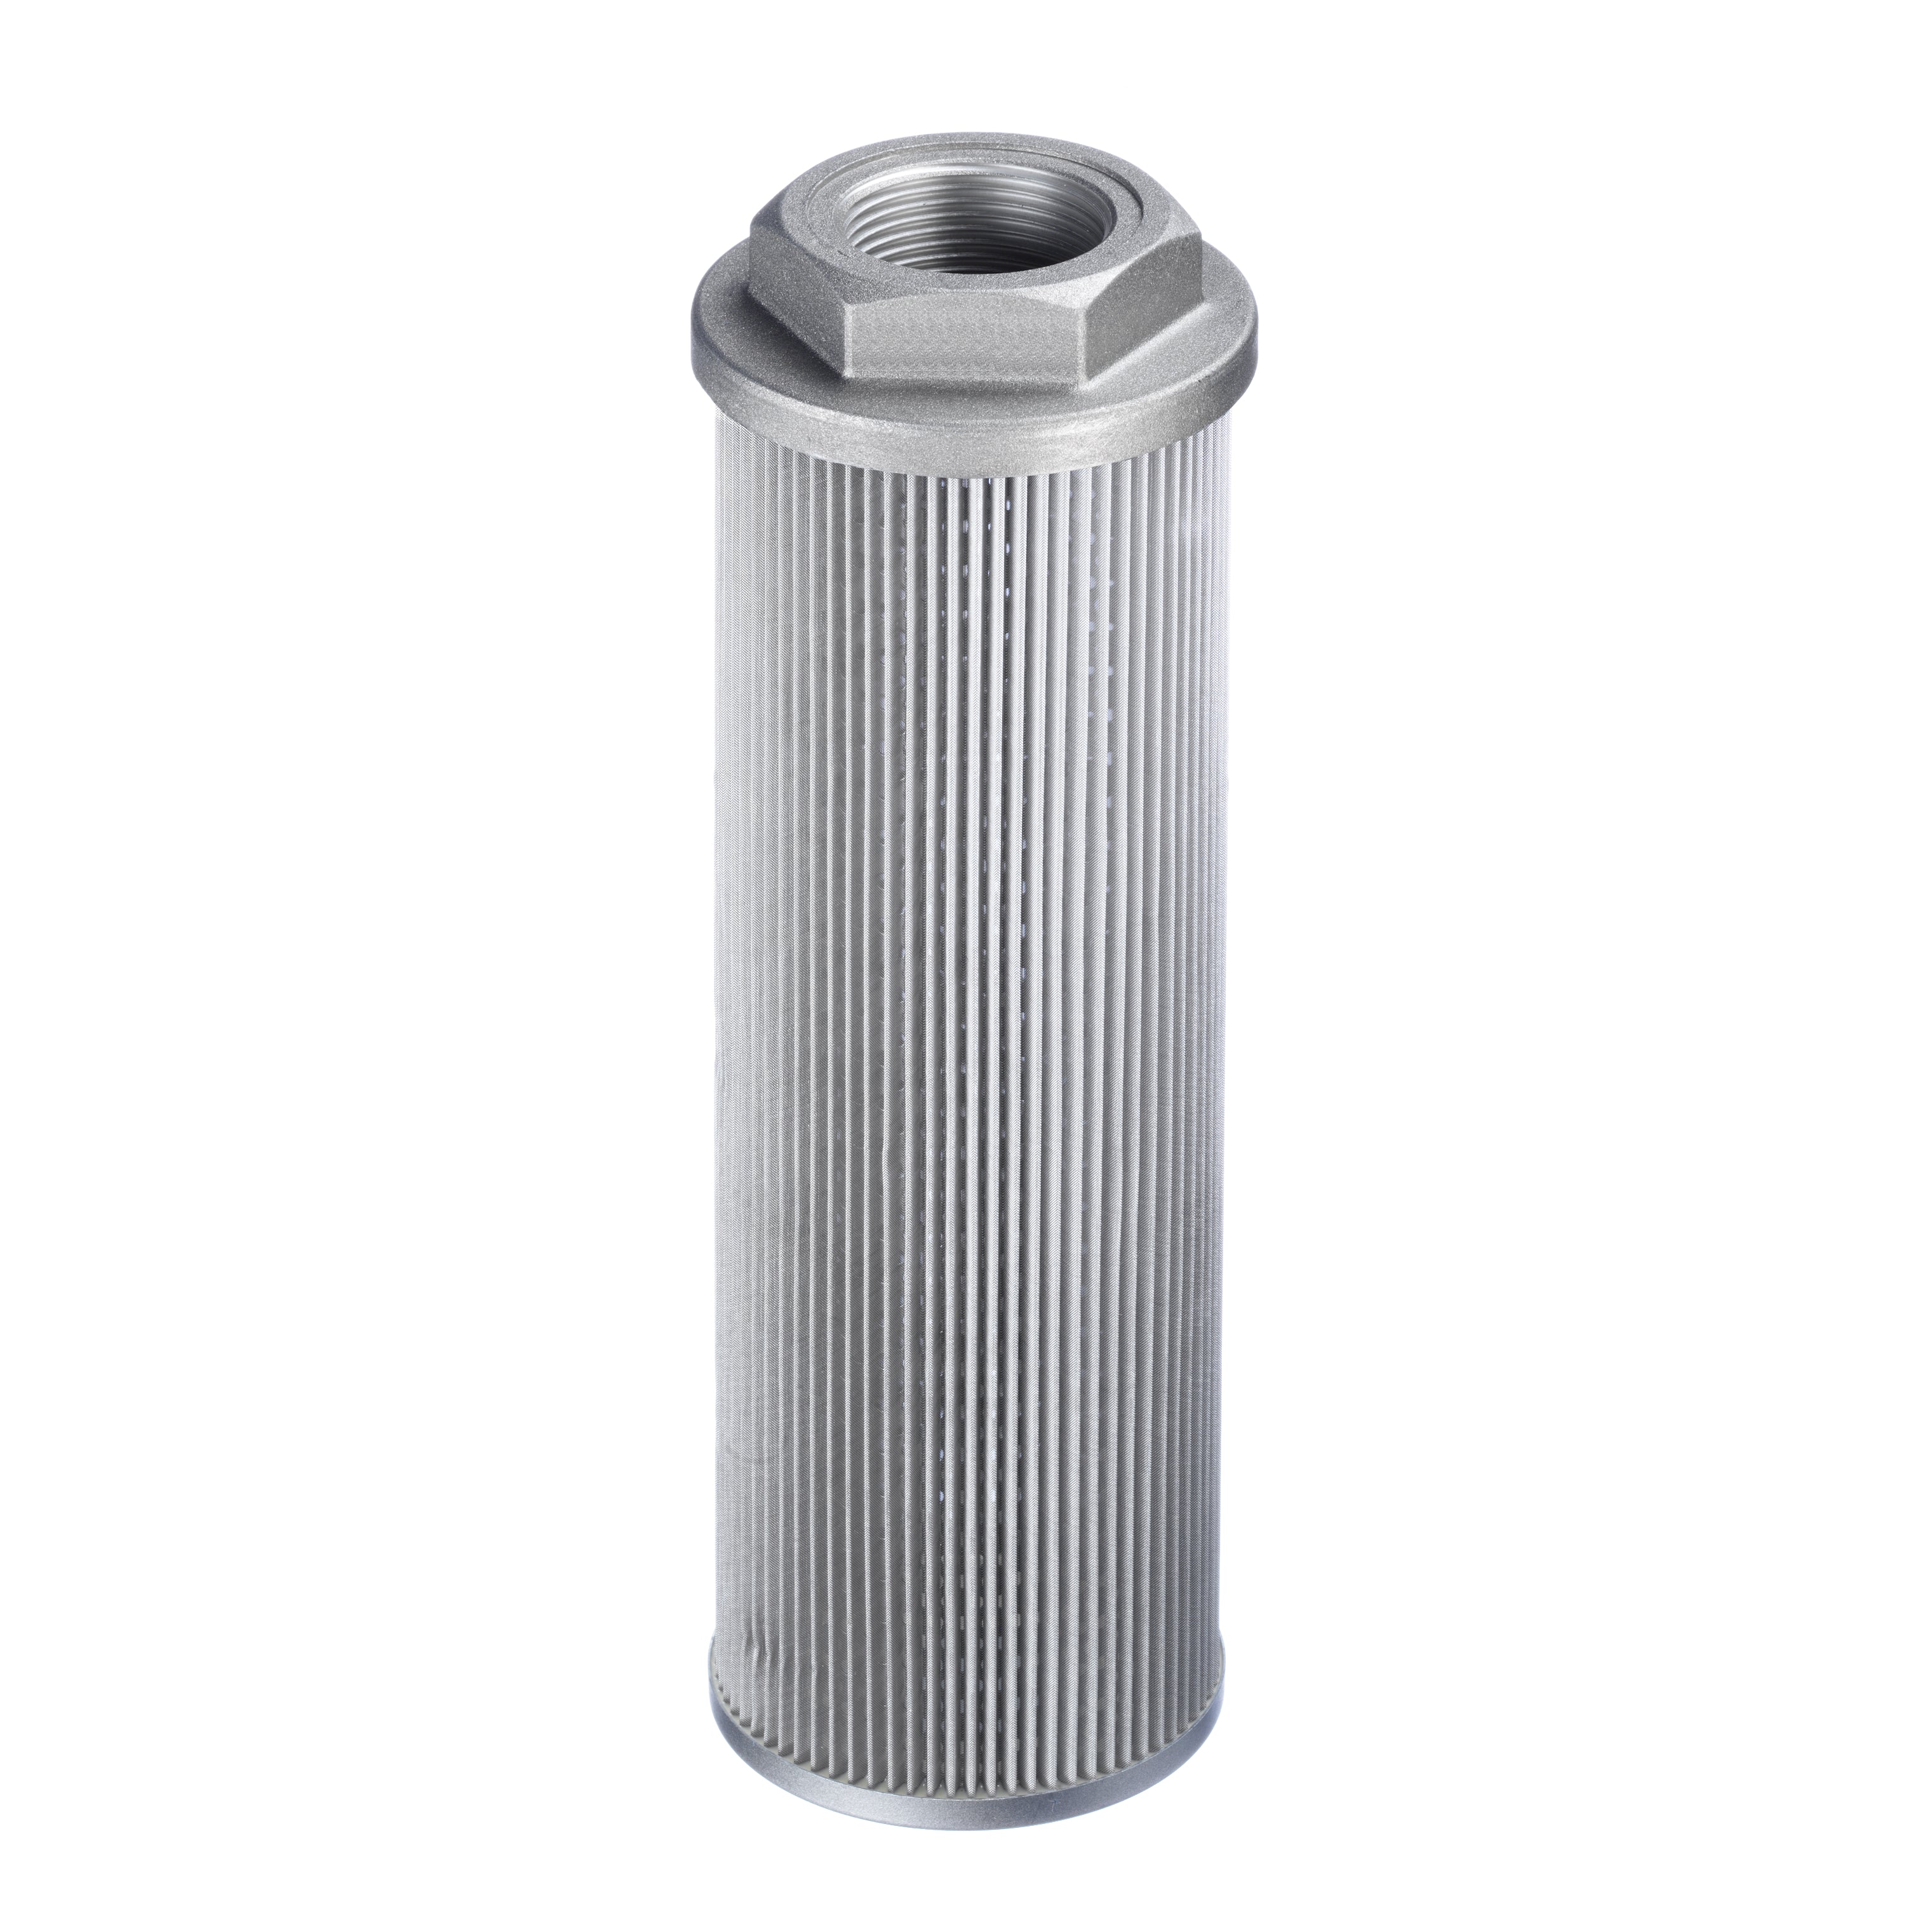 SUS-068-N16-140-125-A-O : Stauff Suction Strainer, Aluminum End Cap, 1" NPT, 13GPM, 125 Micron, No Bypass